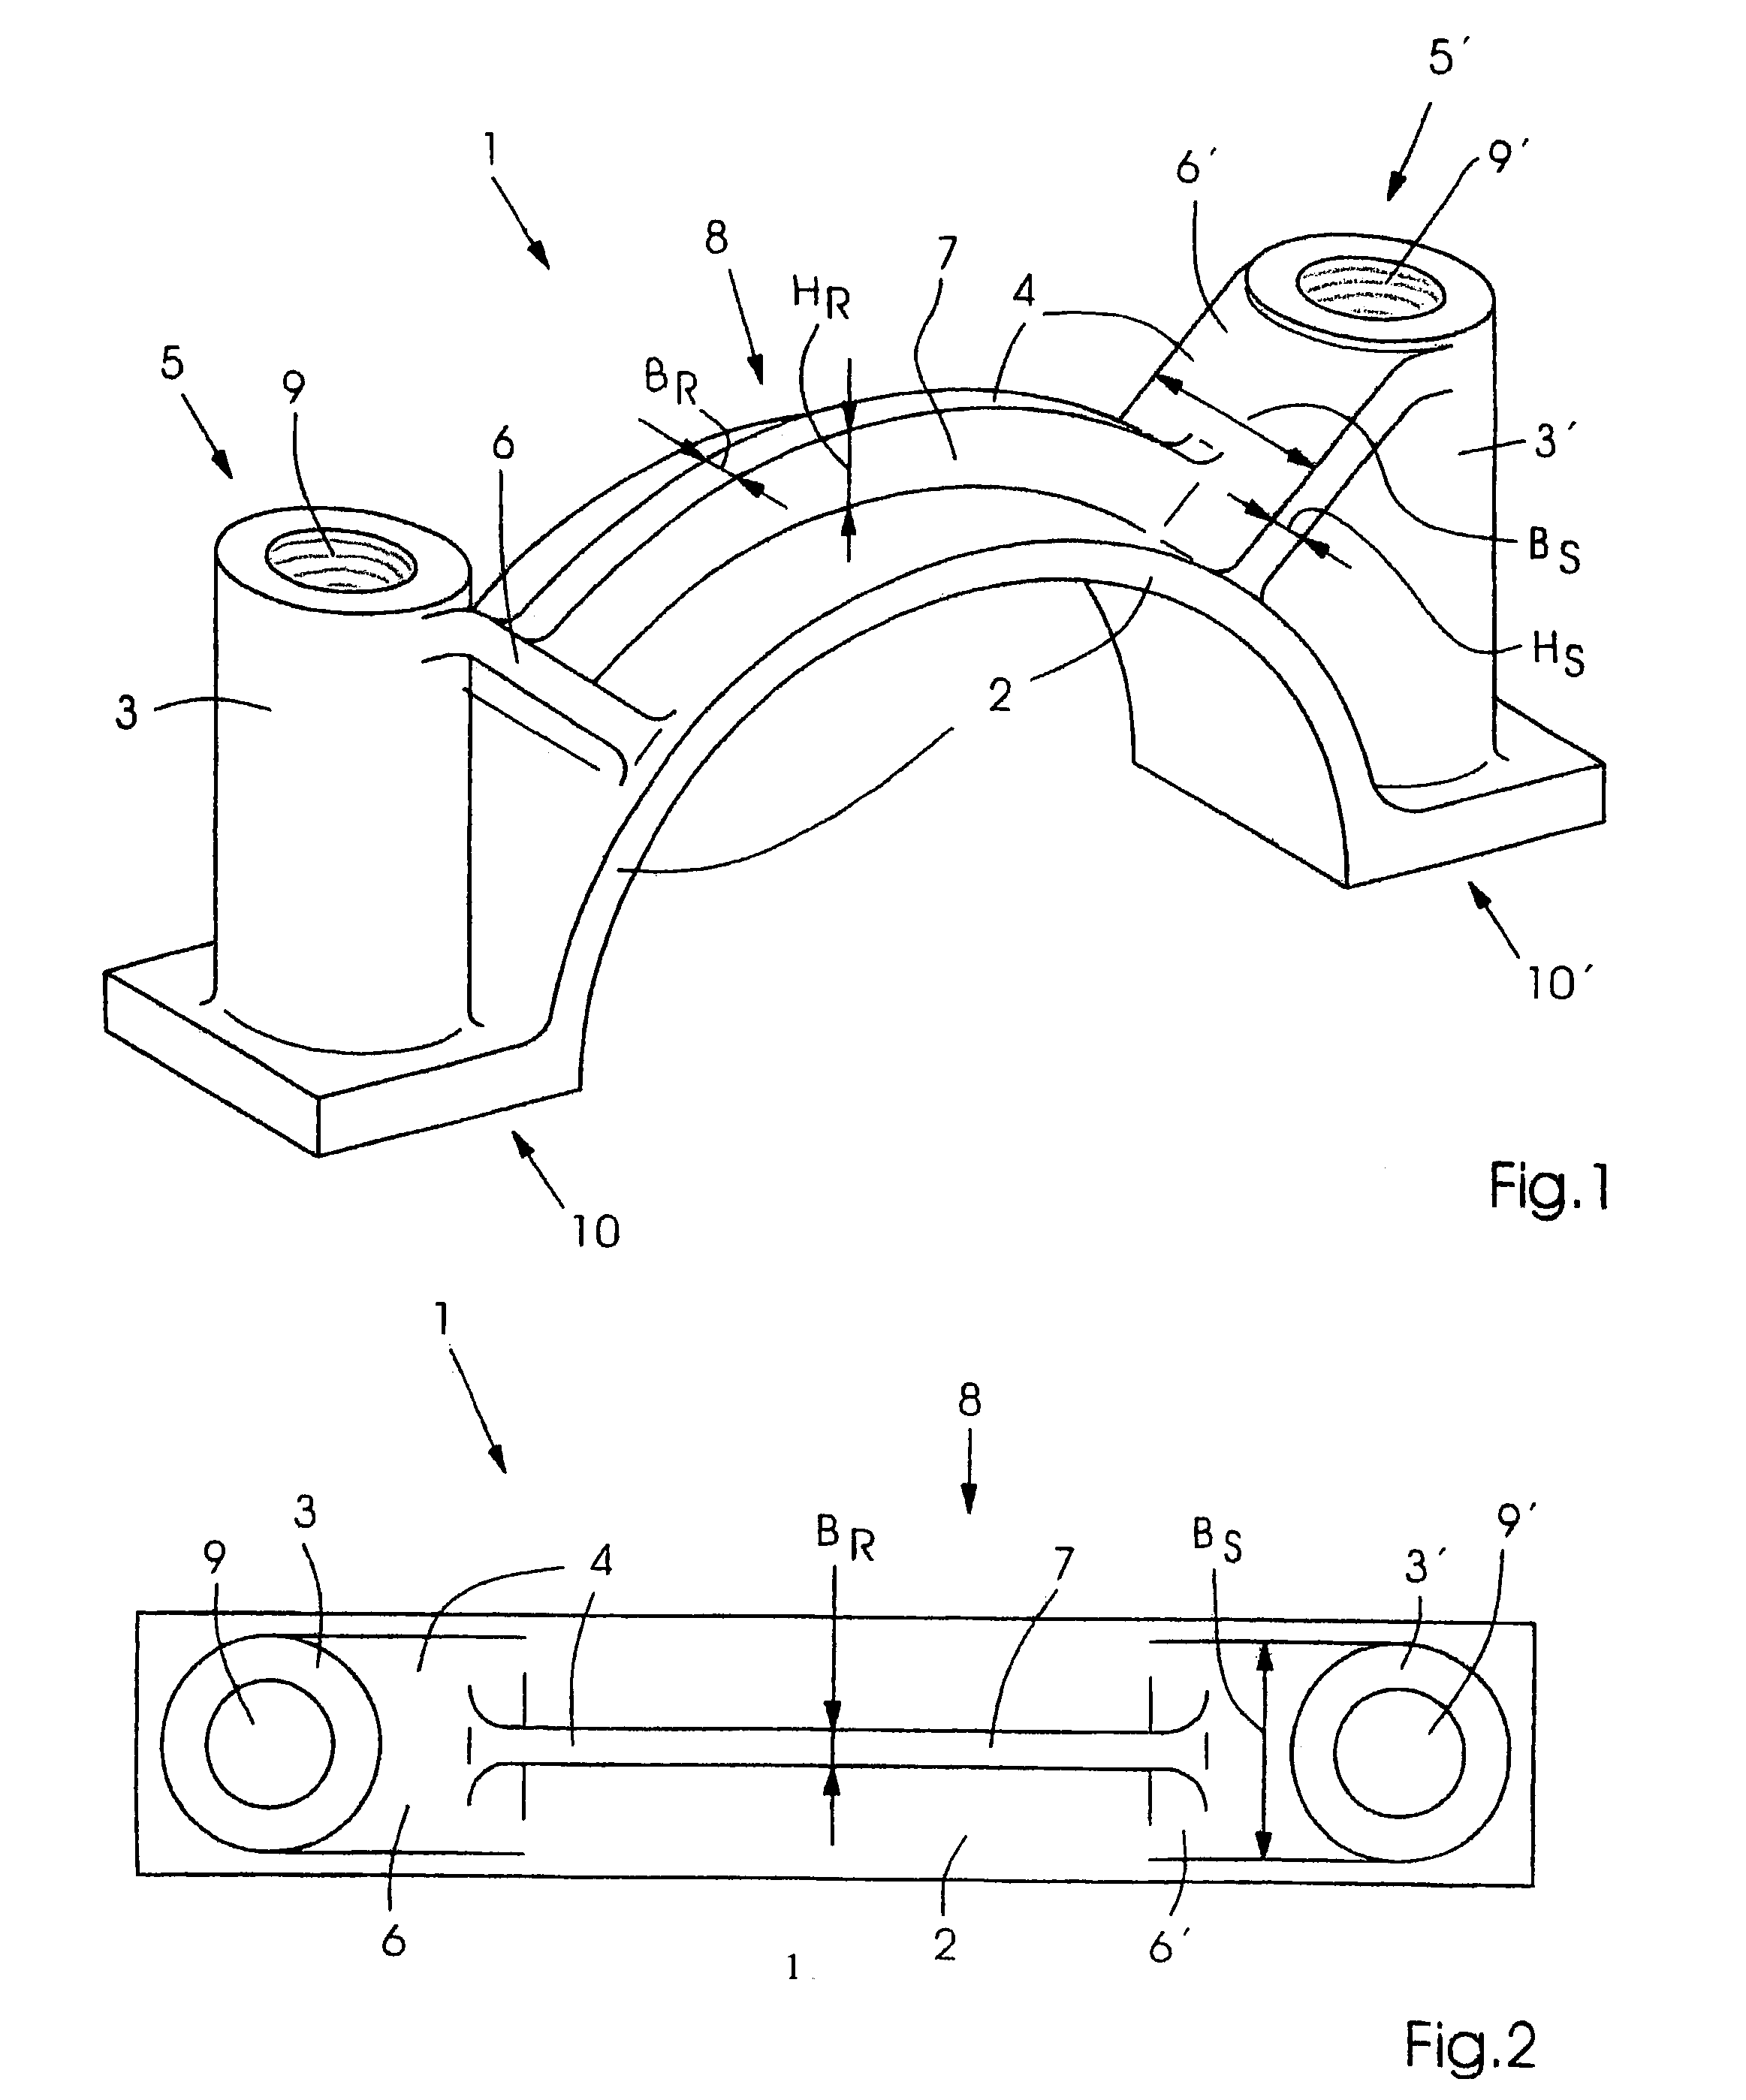 Bearing cover for a crankshaft bearing of an internal combustion engine